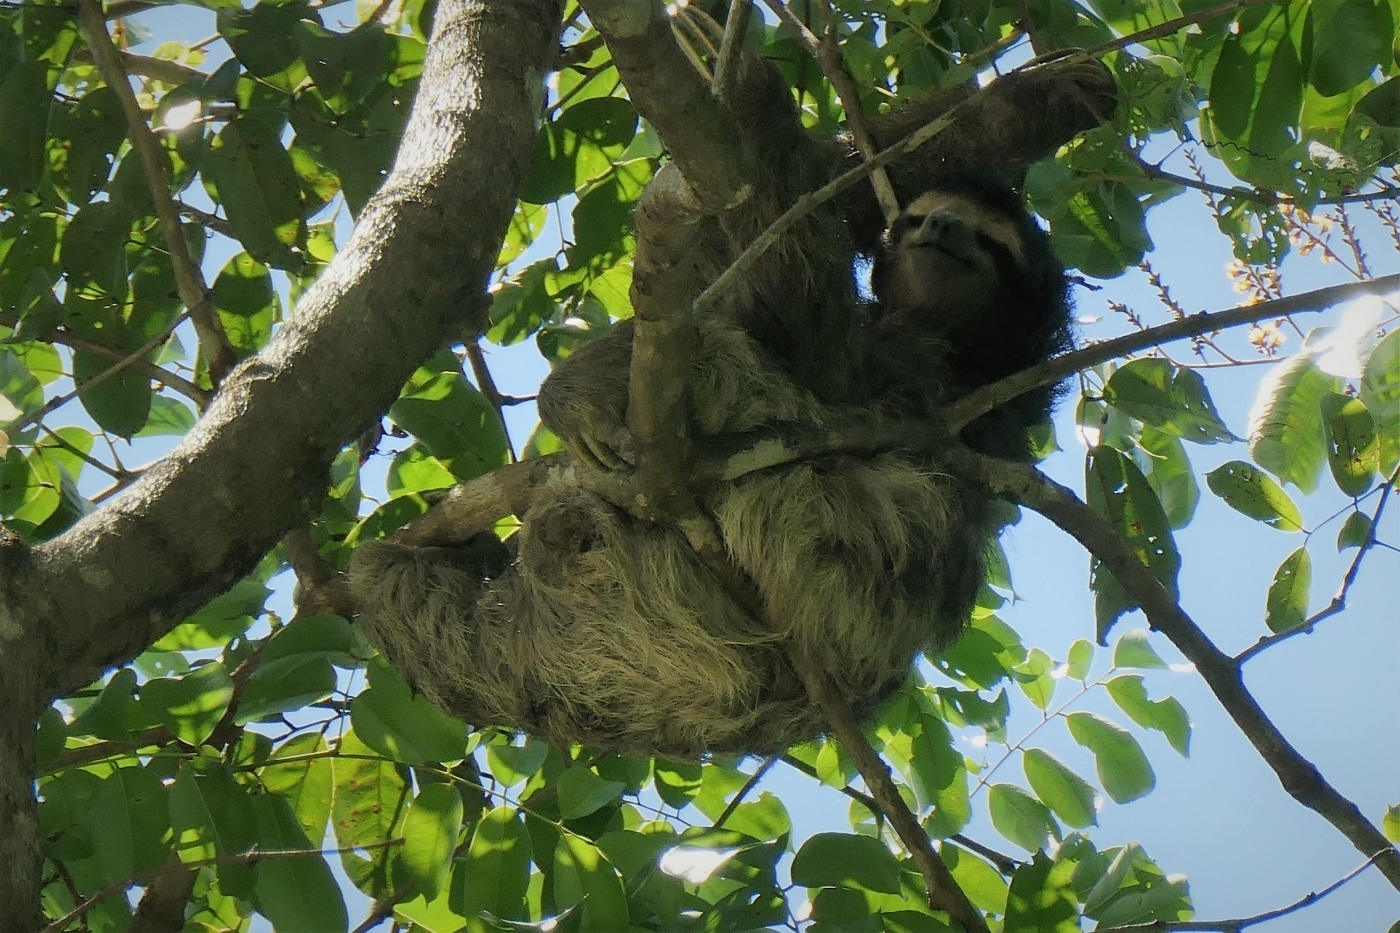 Encountered the first sloth of this trip while I made a break for the sunshine!  Three Toed Sloth - Talamanca Province, Costa Rica